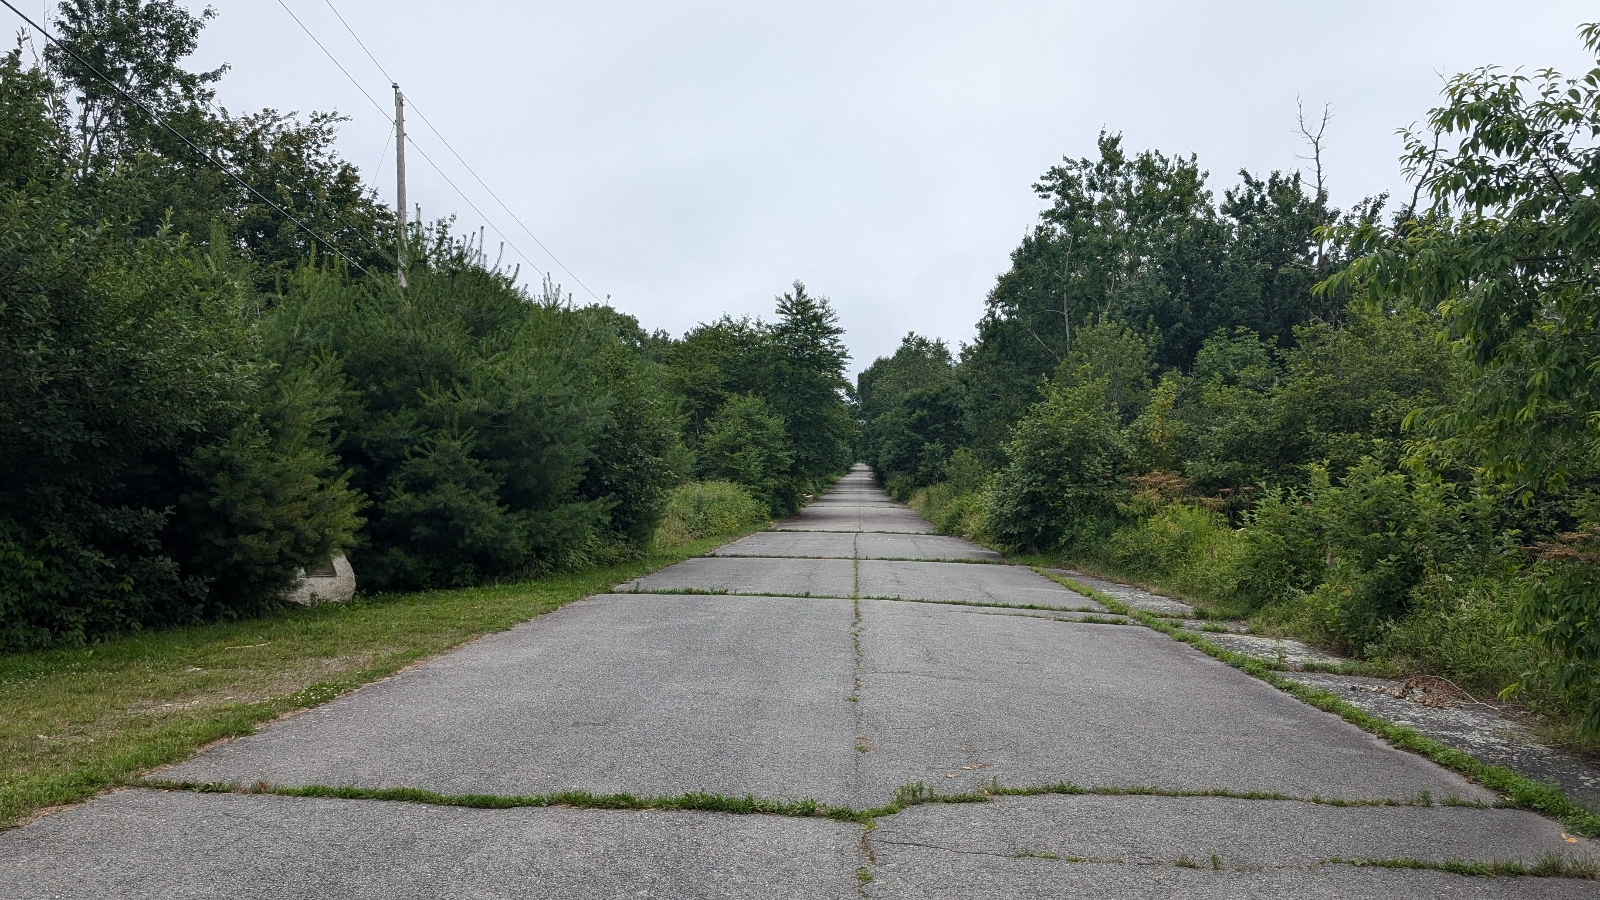 A cracked asphalt road bisects a green forest.